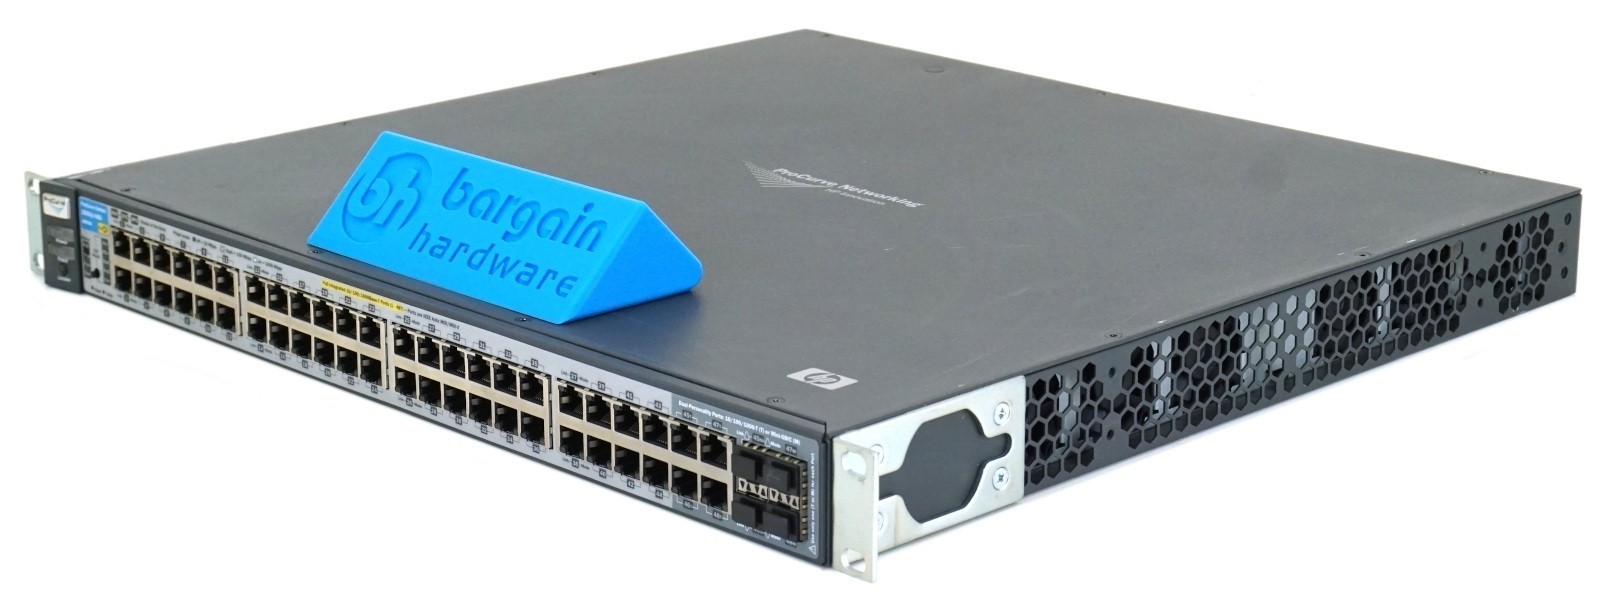 HP (J9311A) Pro-Curve 3500YL-48G-PoE+ - 48 RJ-45 Port PoE+ Switch -With Ears